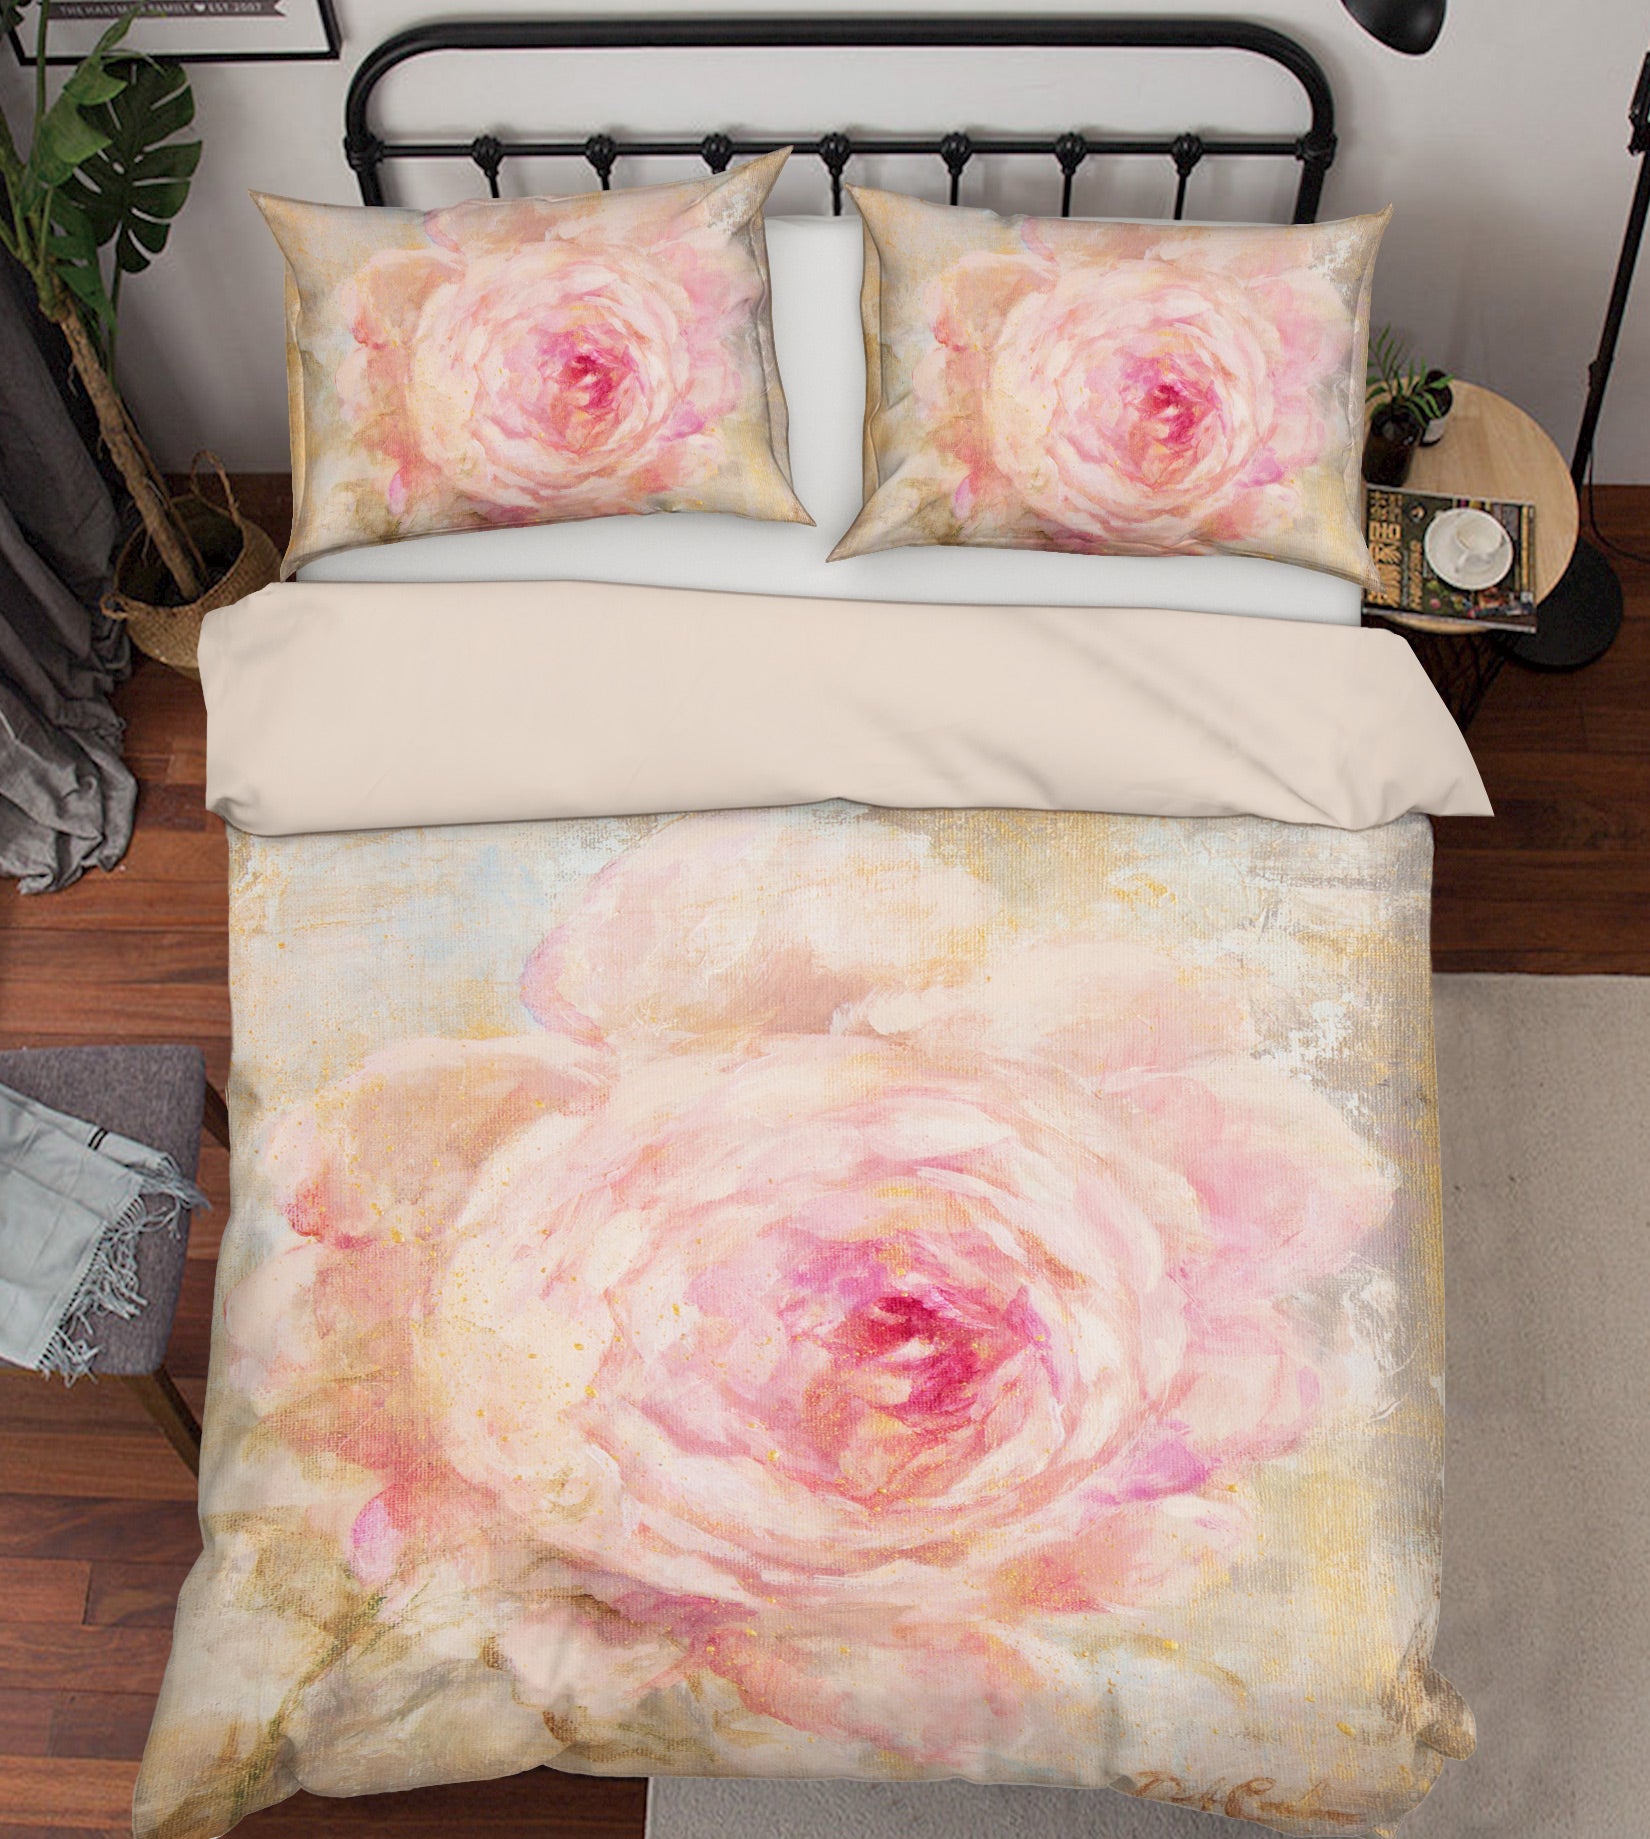 3D Pink Flower 2133 Debi Coules Bedding Bed Pillowcases Quilt